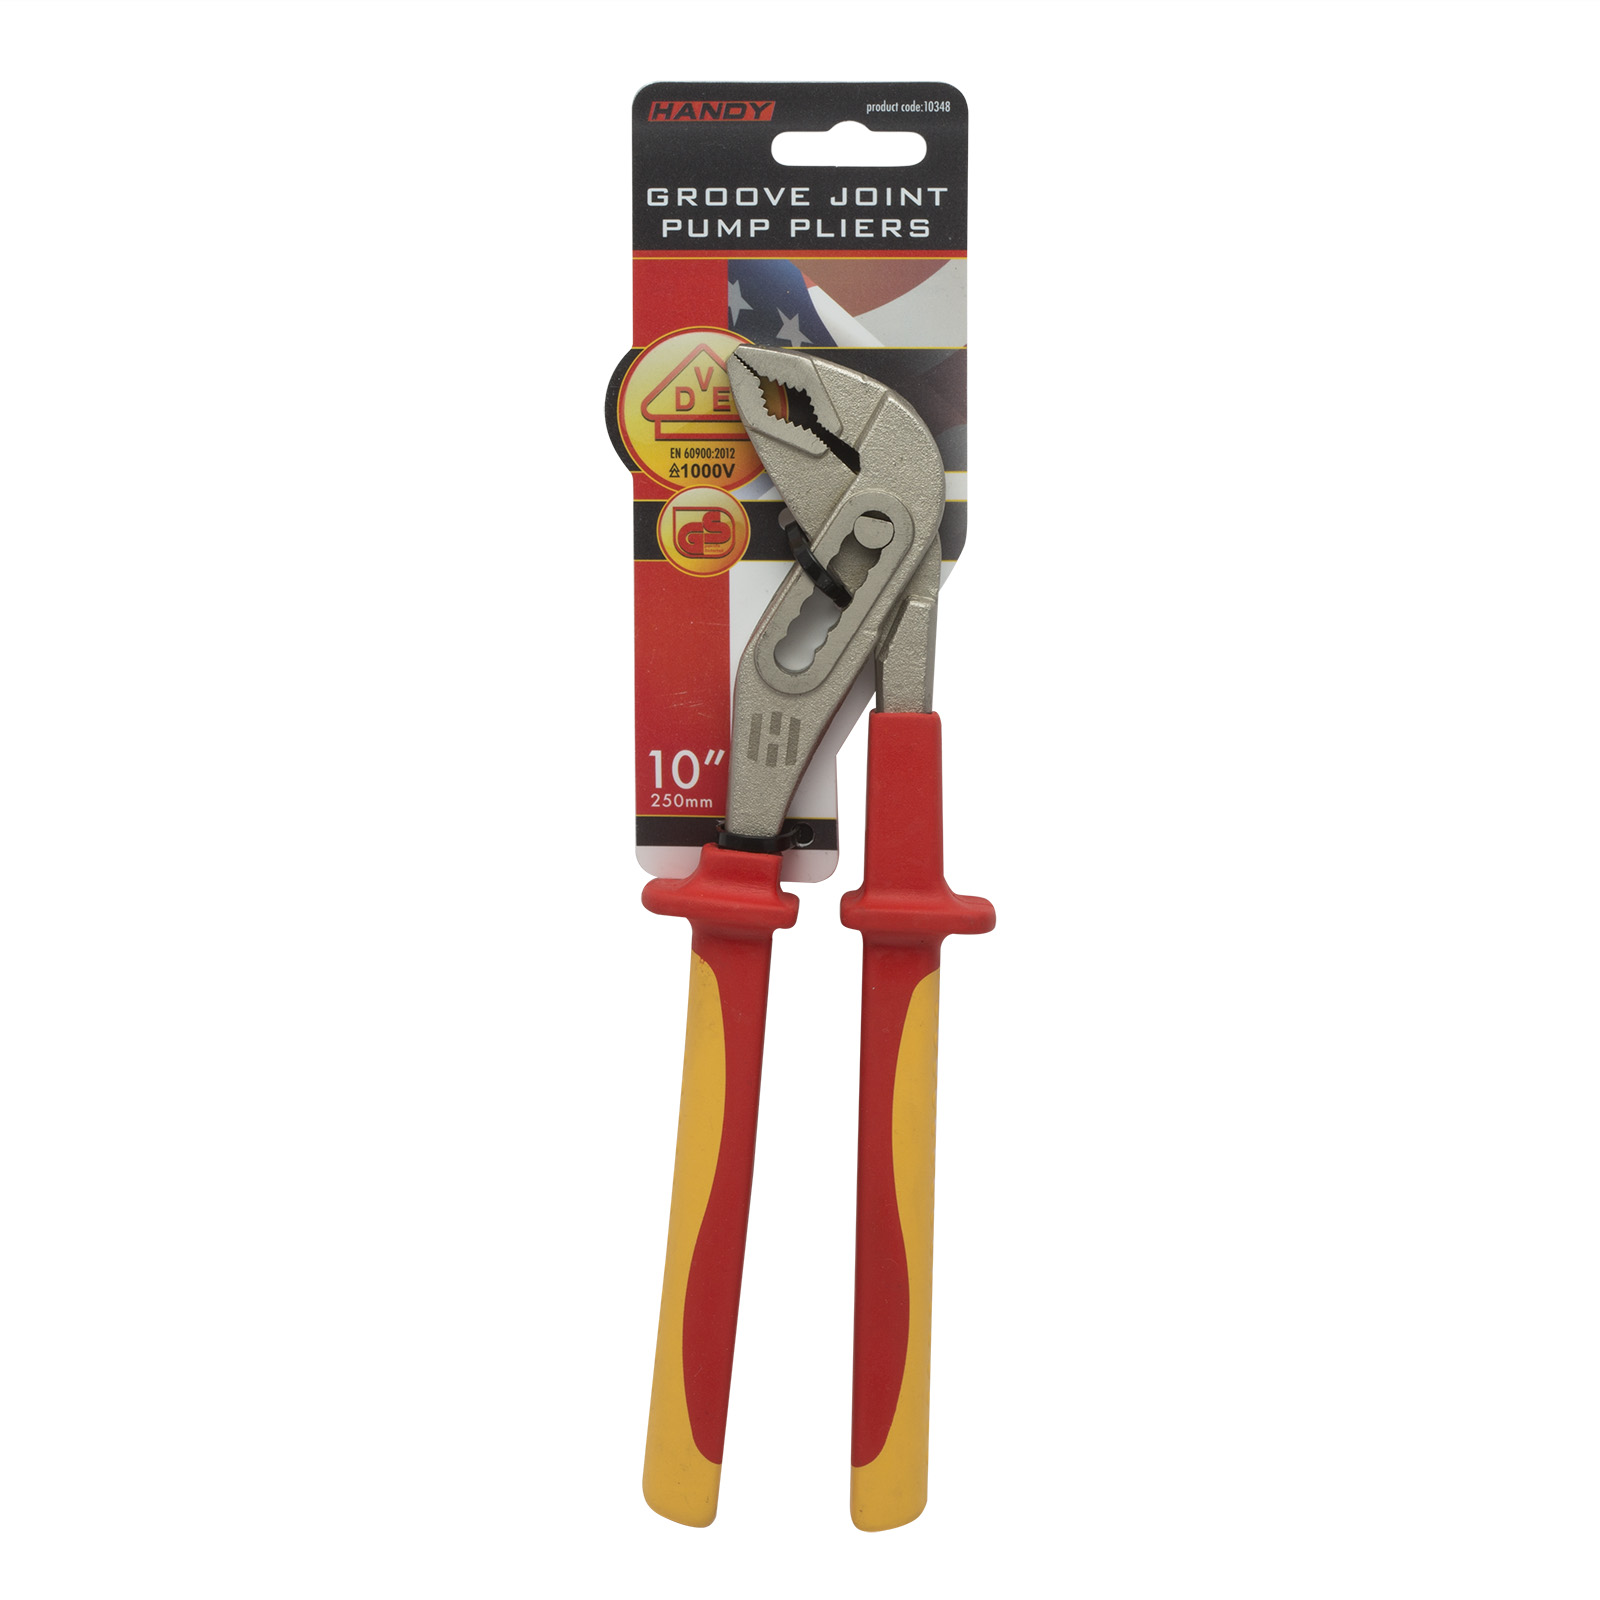 Groove Joint Pump Pliers thumb